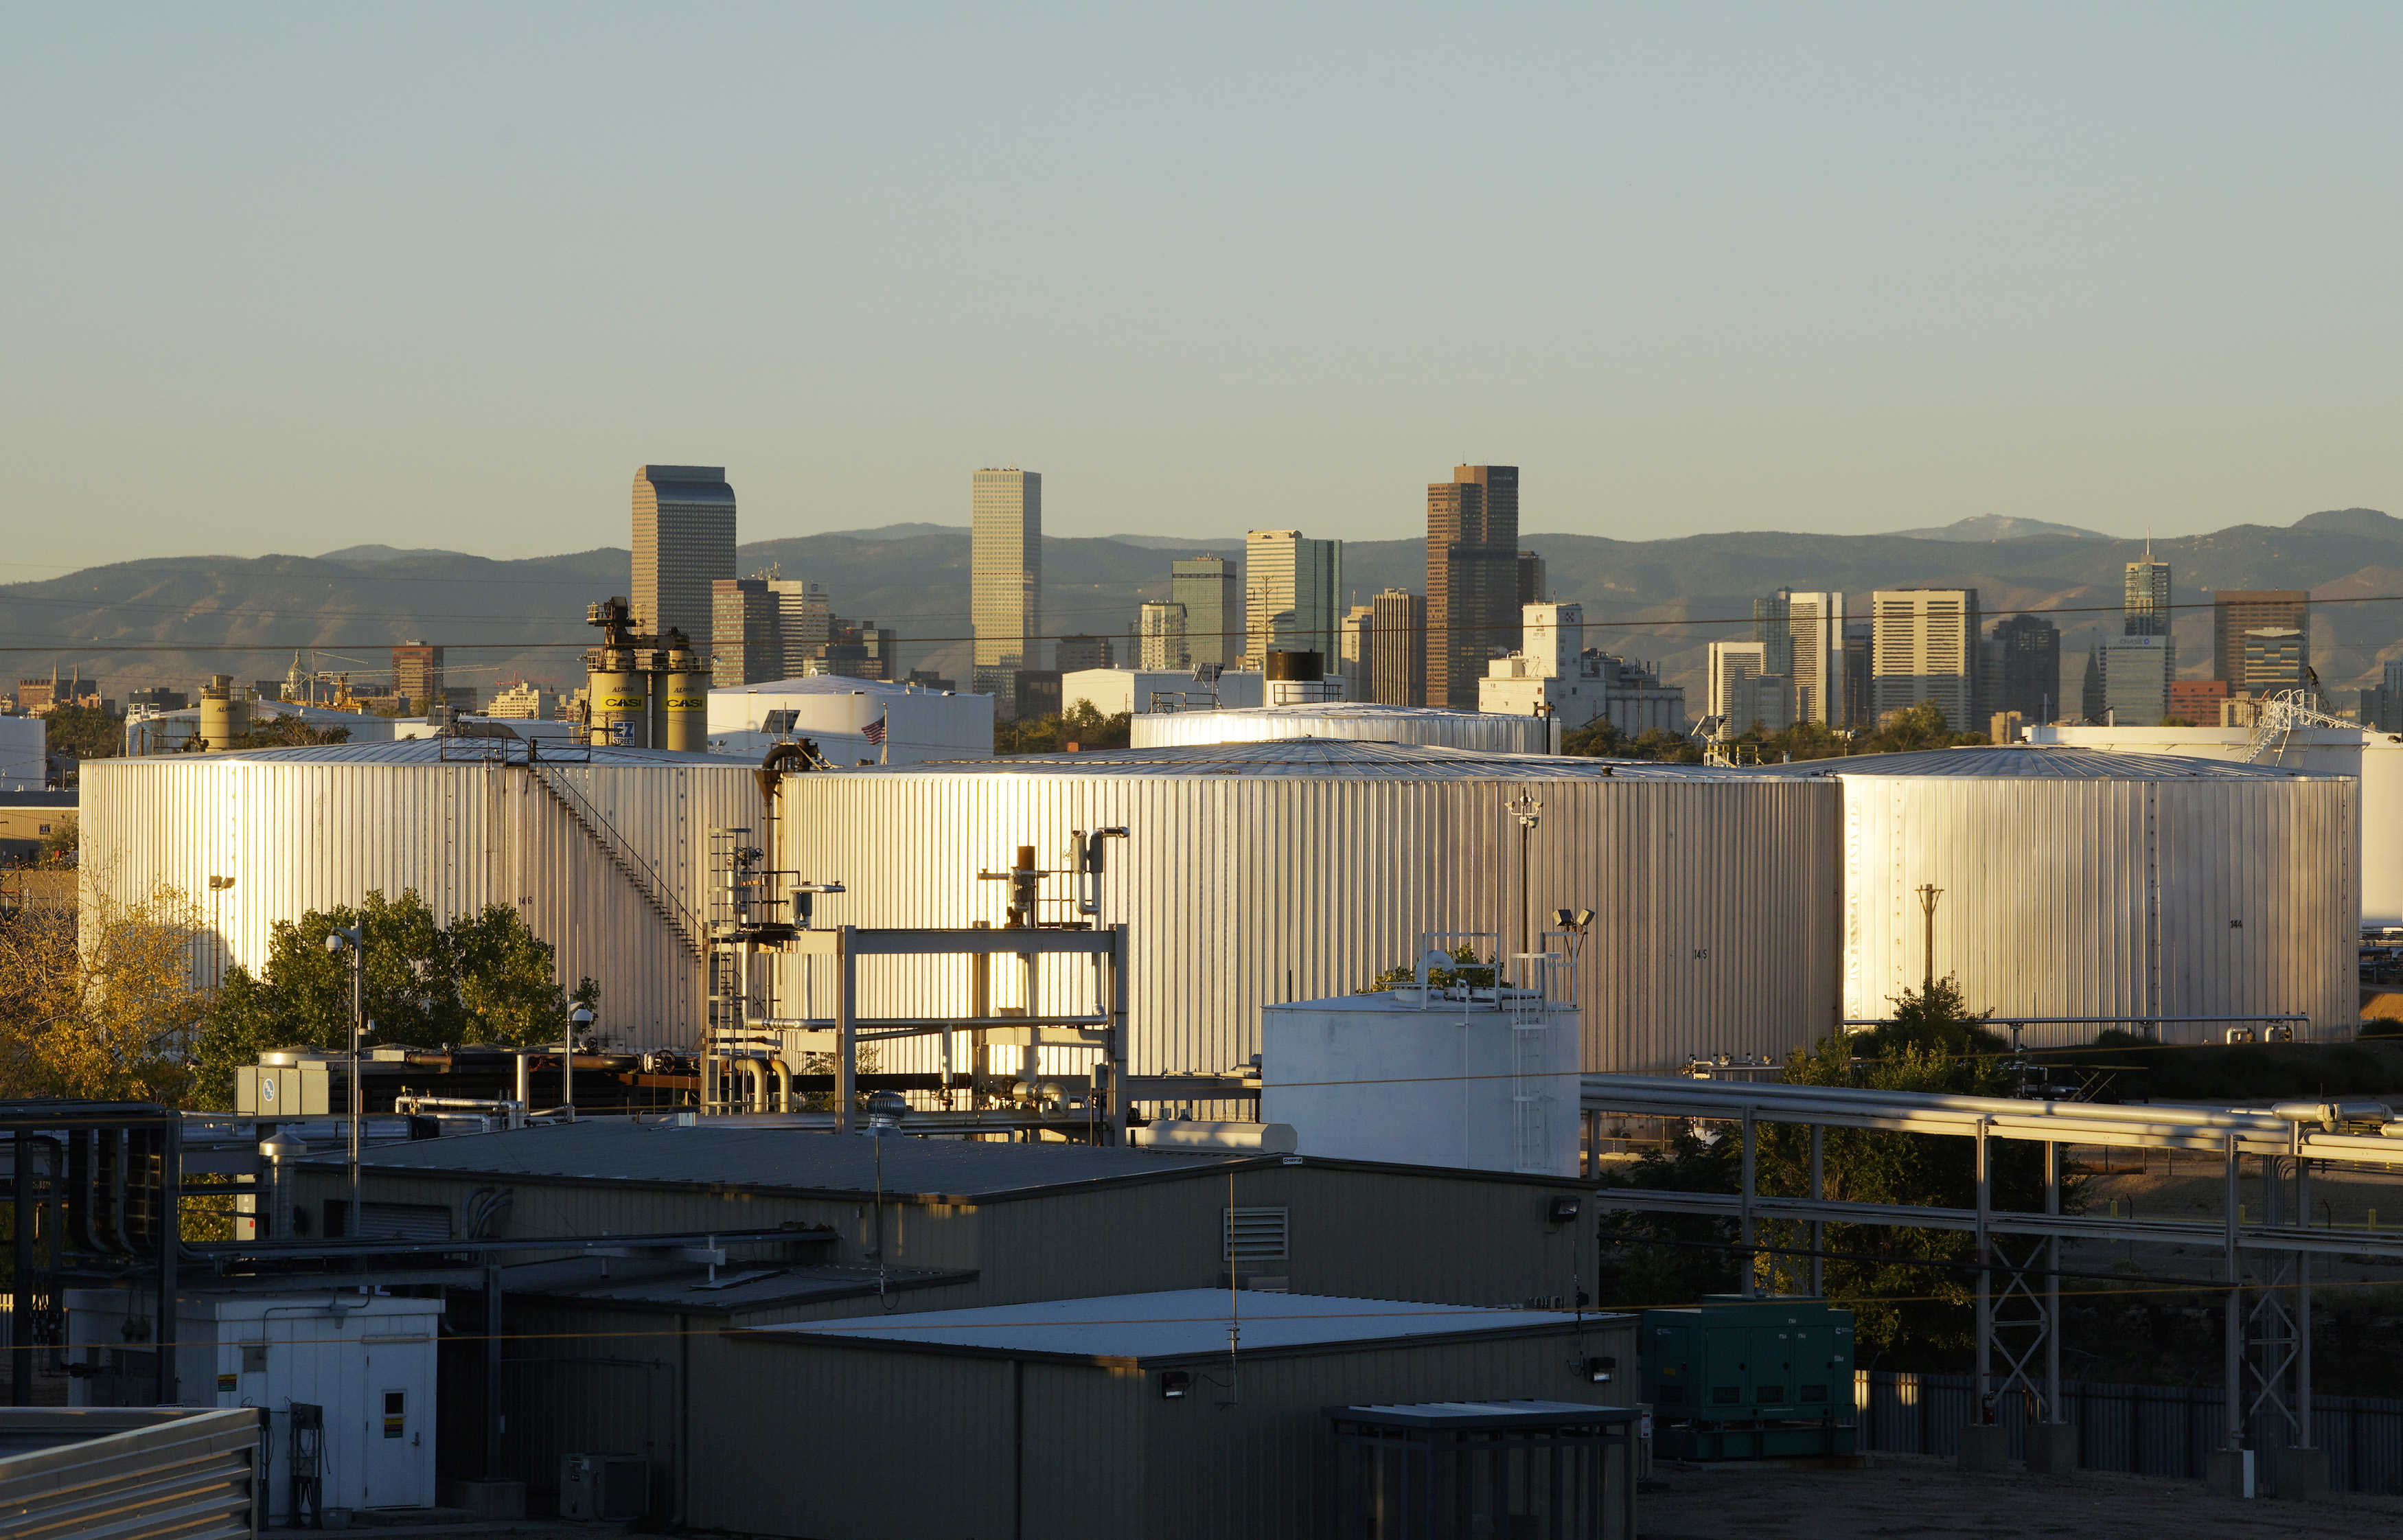 Oil storage tanks are seen at sunrise with the Rocky Mountains and the Denver downtown skyline in the background